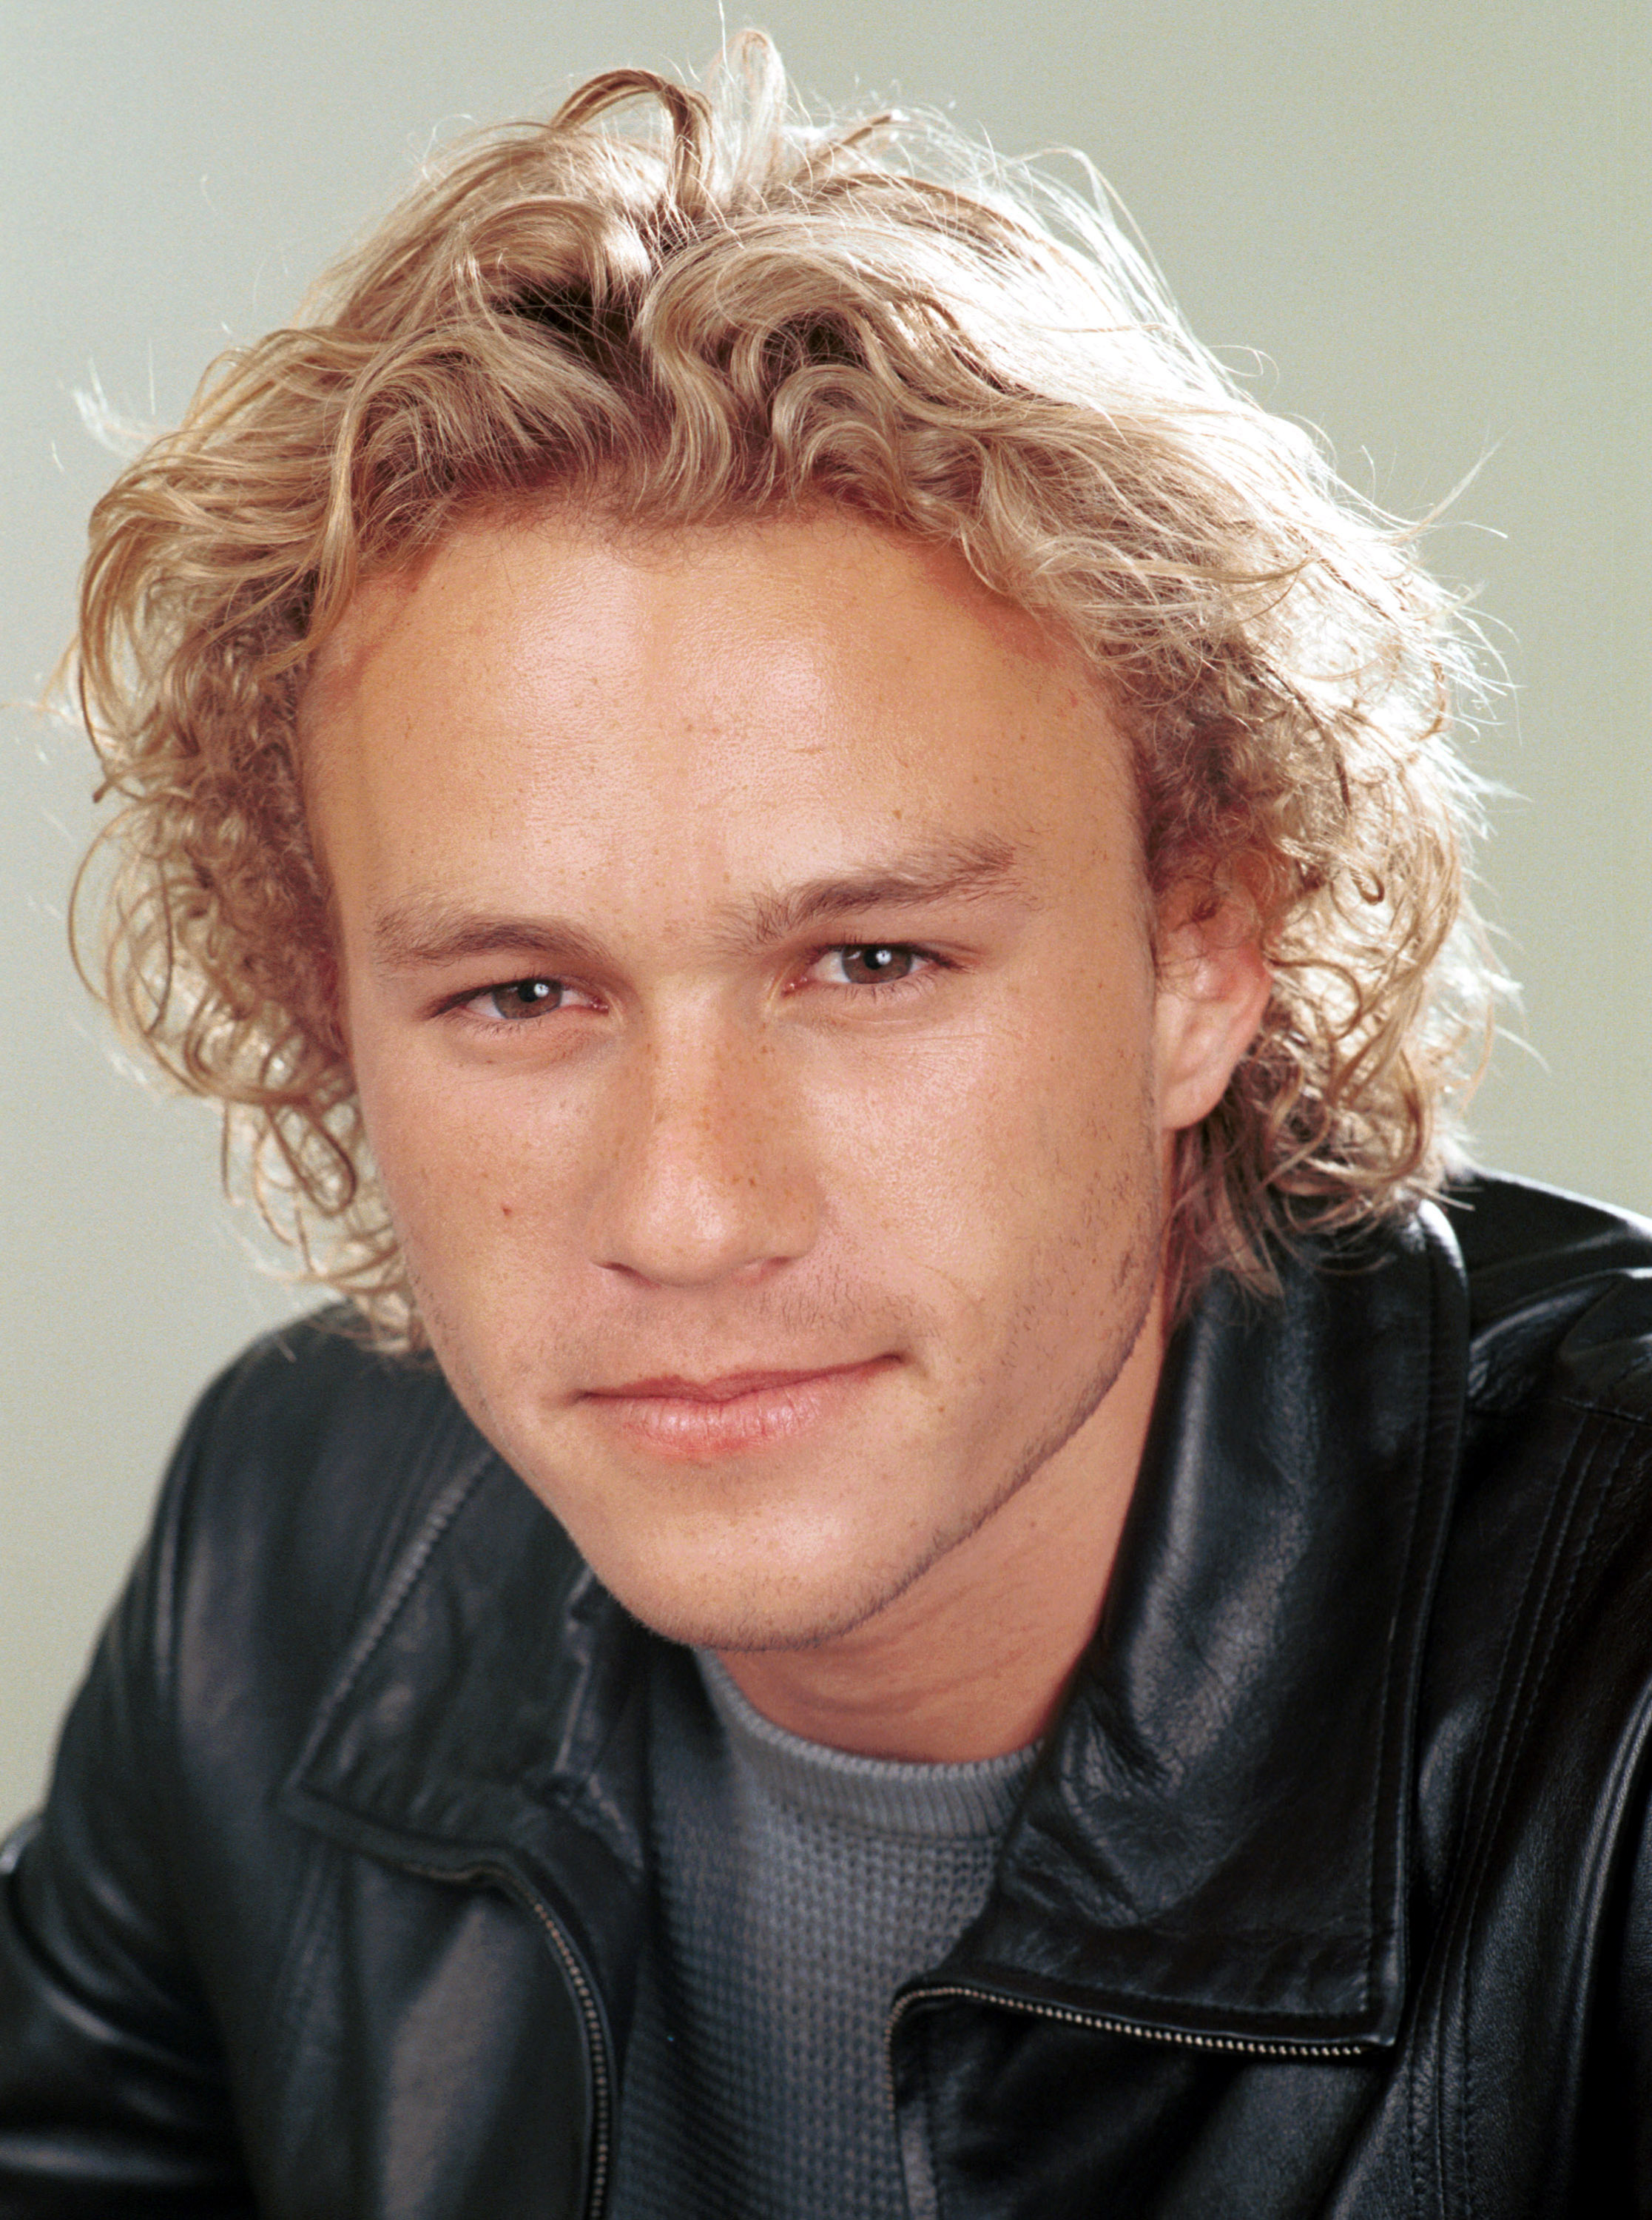 Gallery Hot Pictures: Heath Ledger Wallpaper